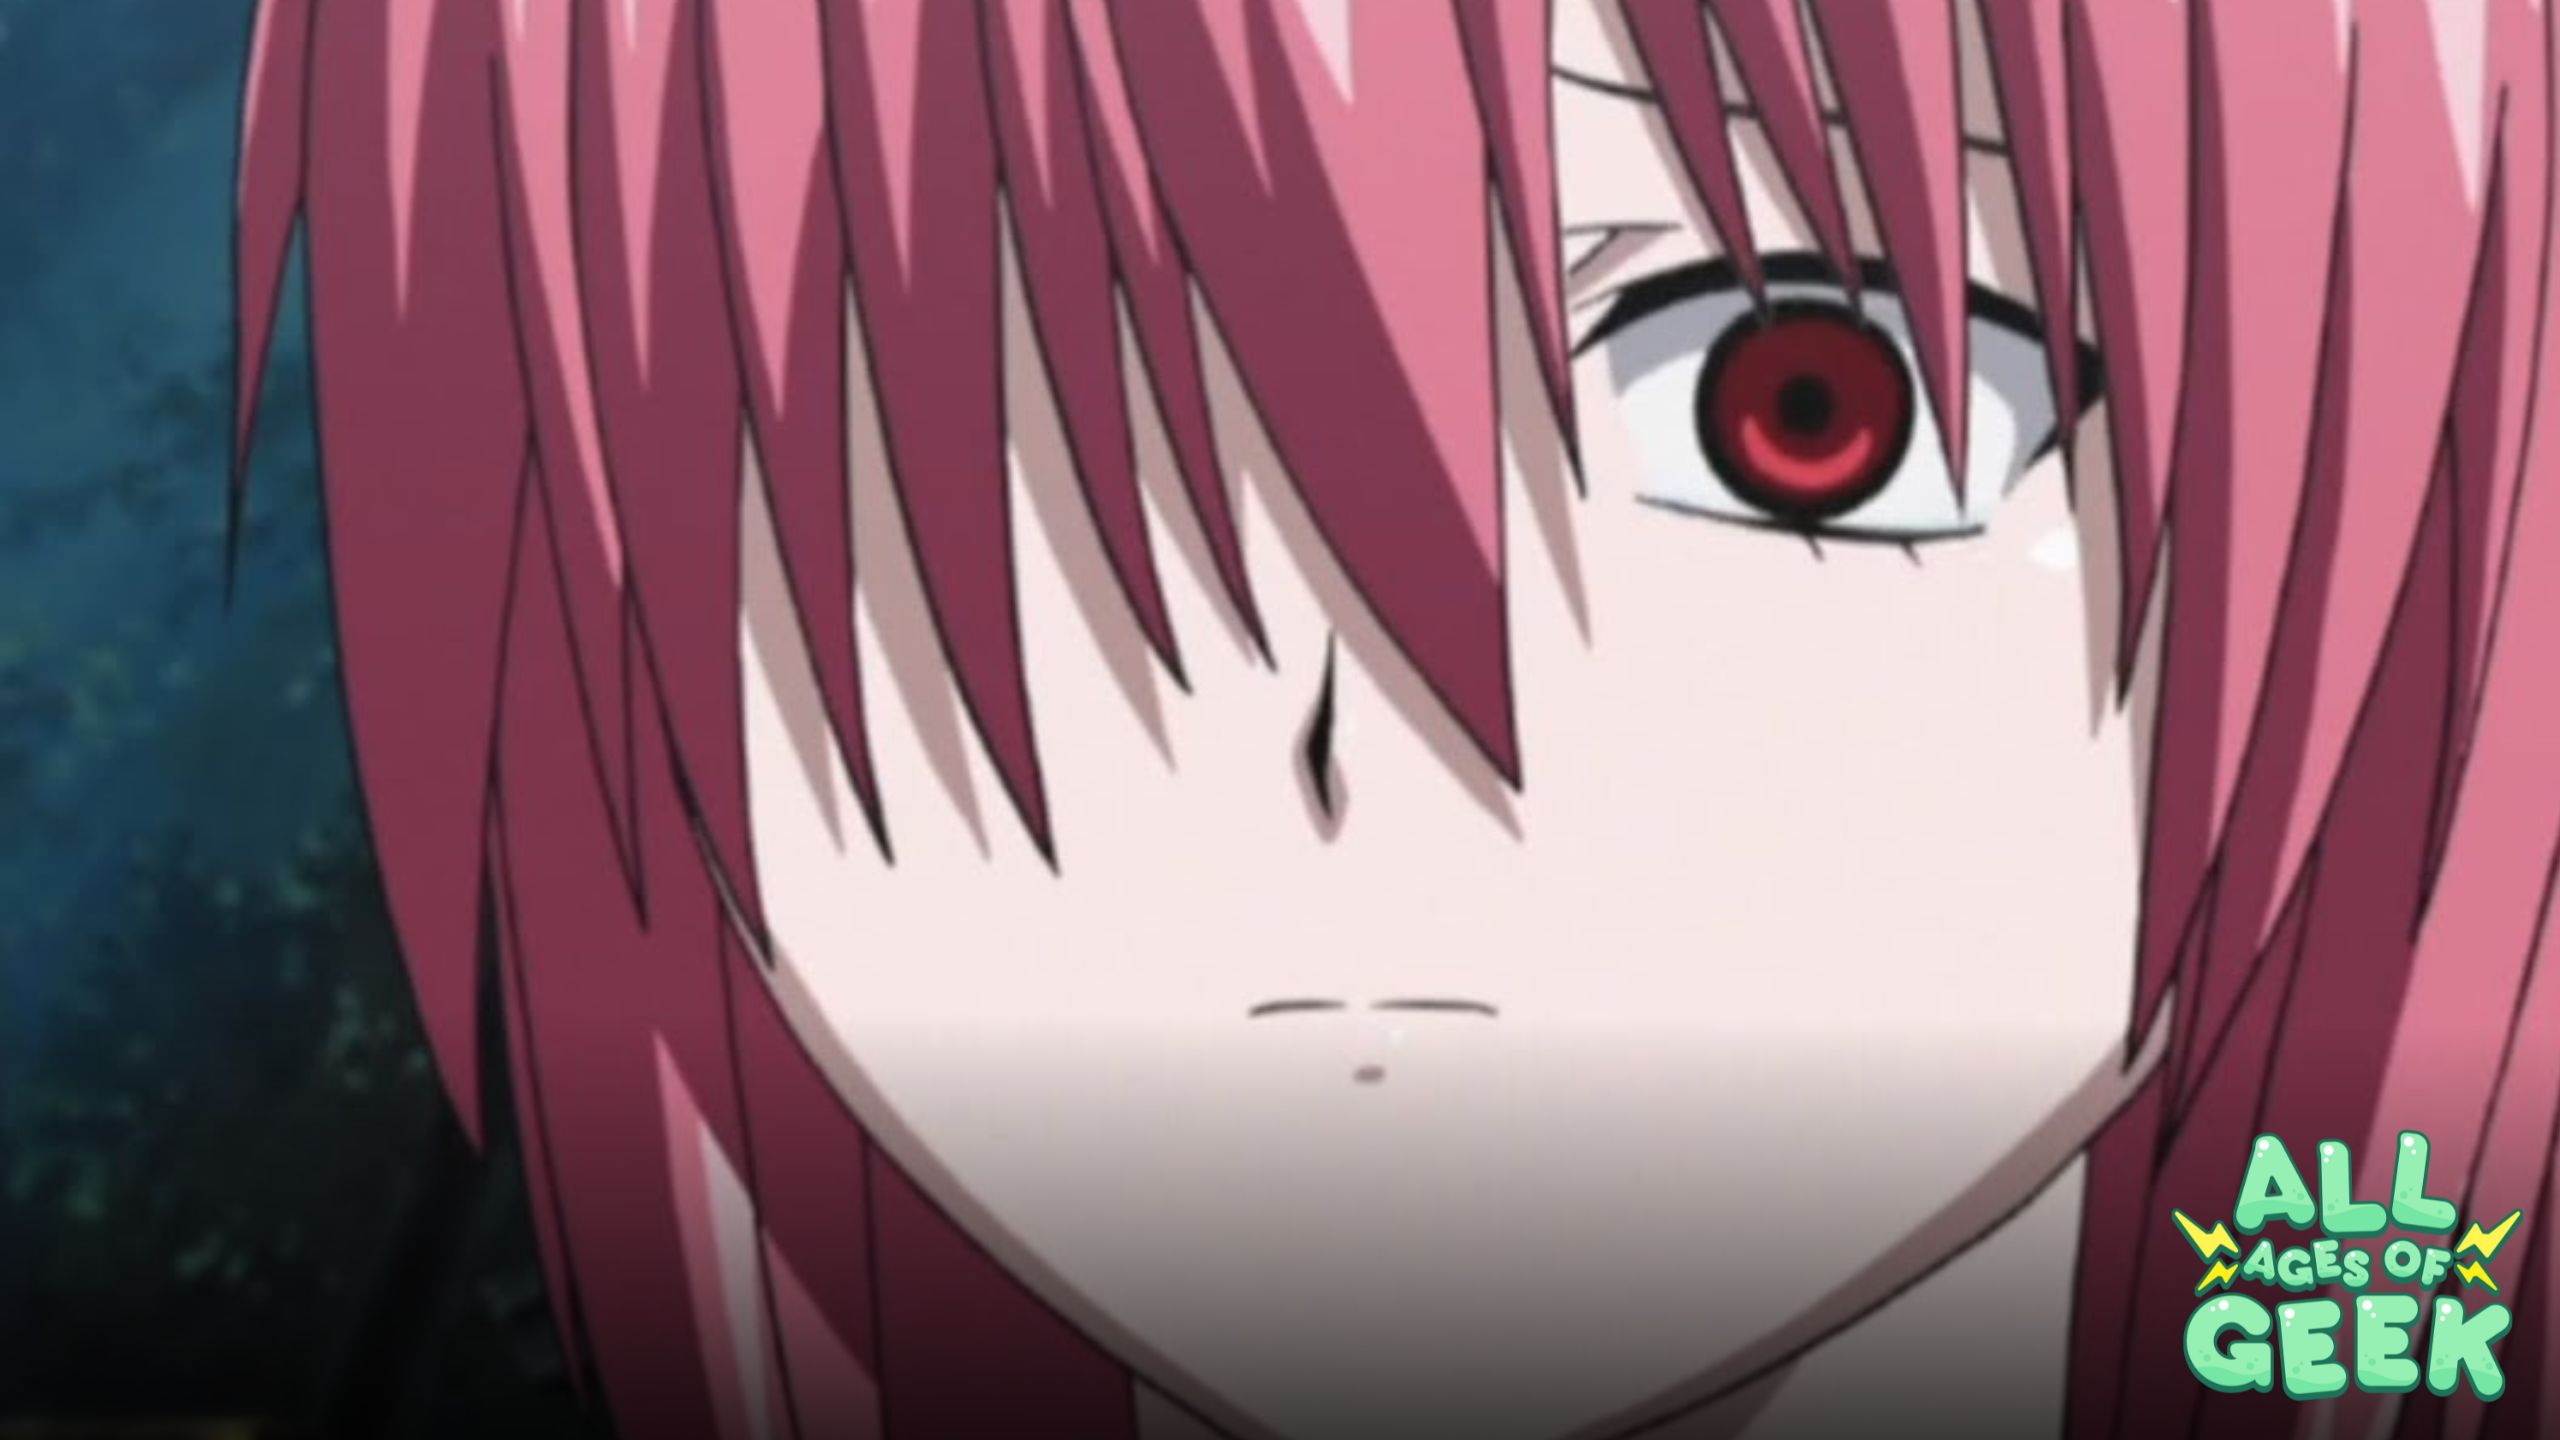 Elfen lied (2004) Story Explained  Elfen Lied Episode 1 - 13 Explained  with Ending / Anime Guy 